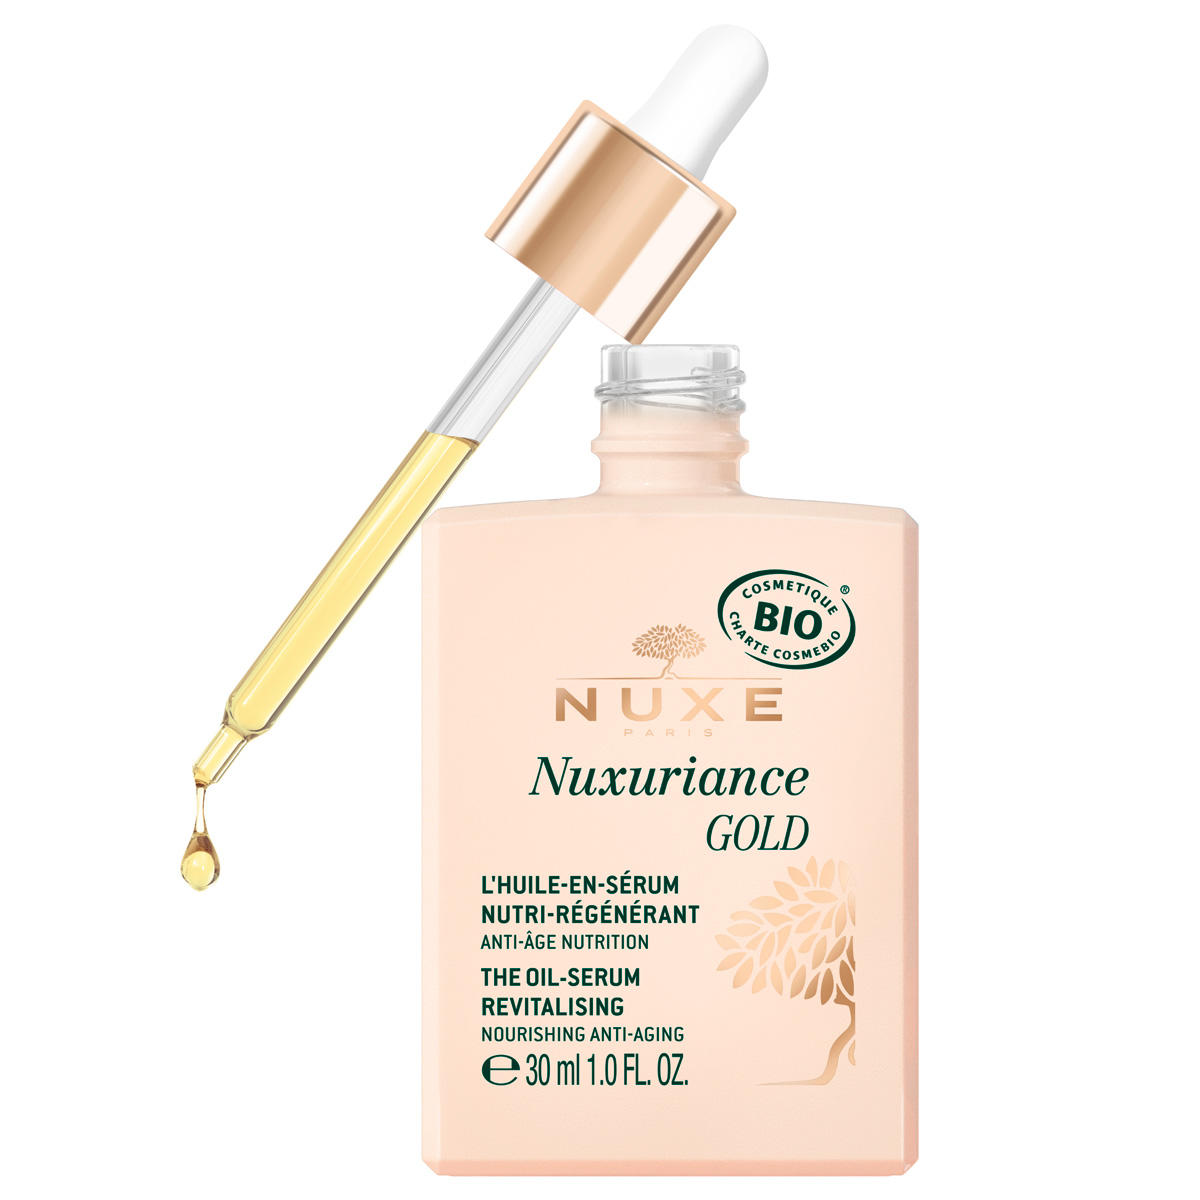 NUXE Nuxuriance Gold The Oil-Serum Revitalising 30 ml - 2